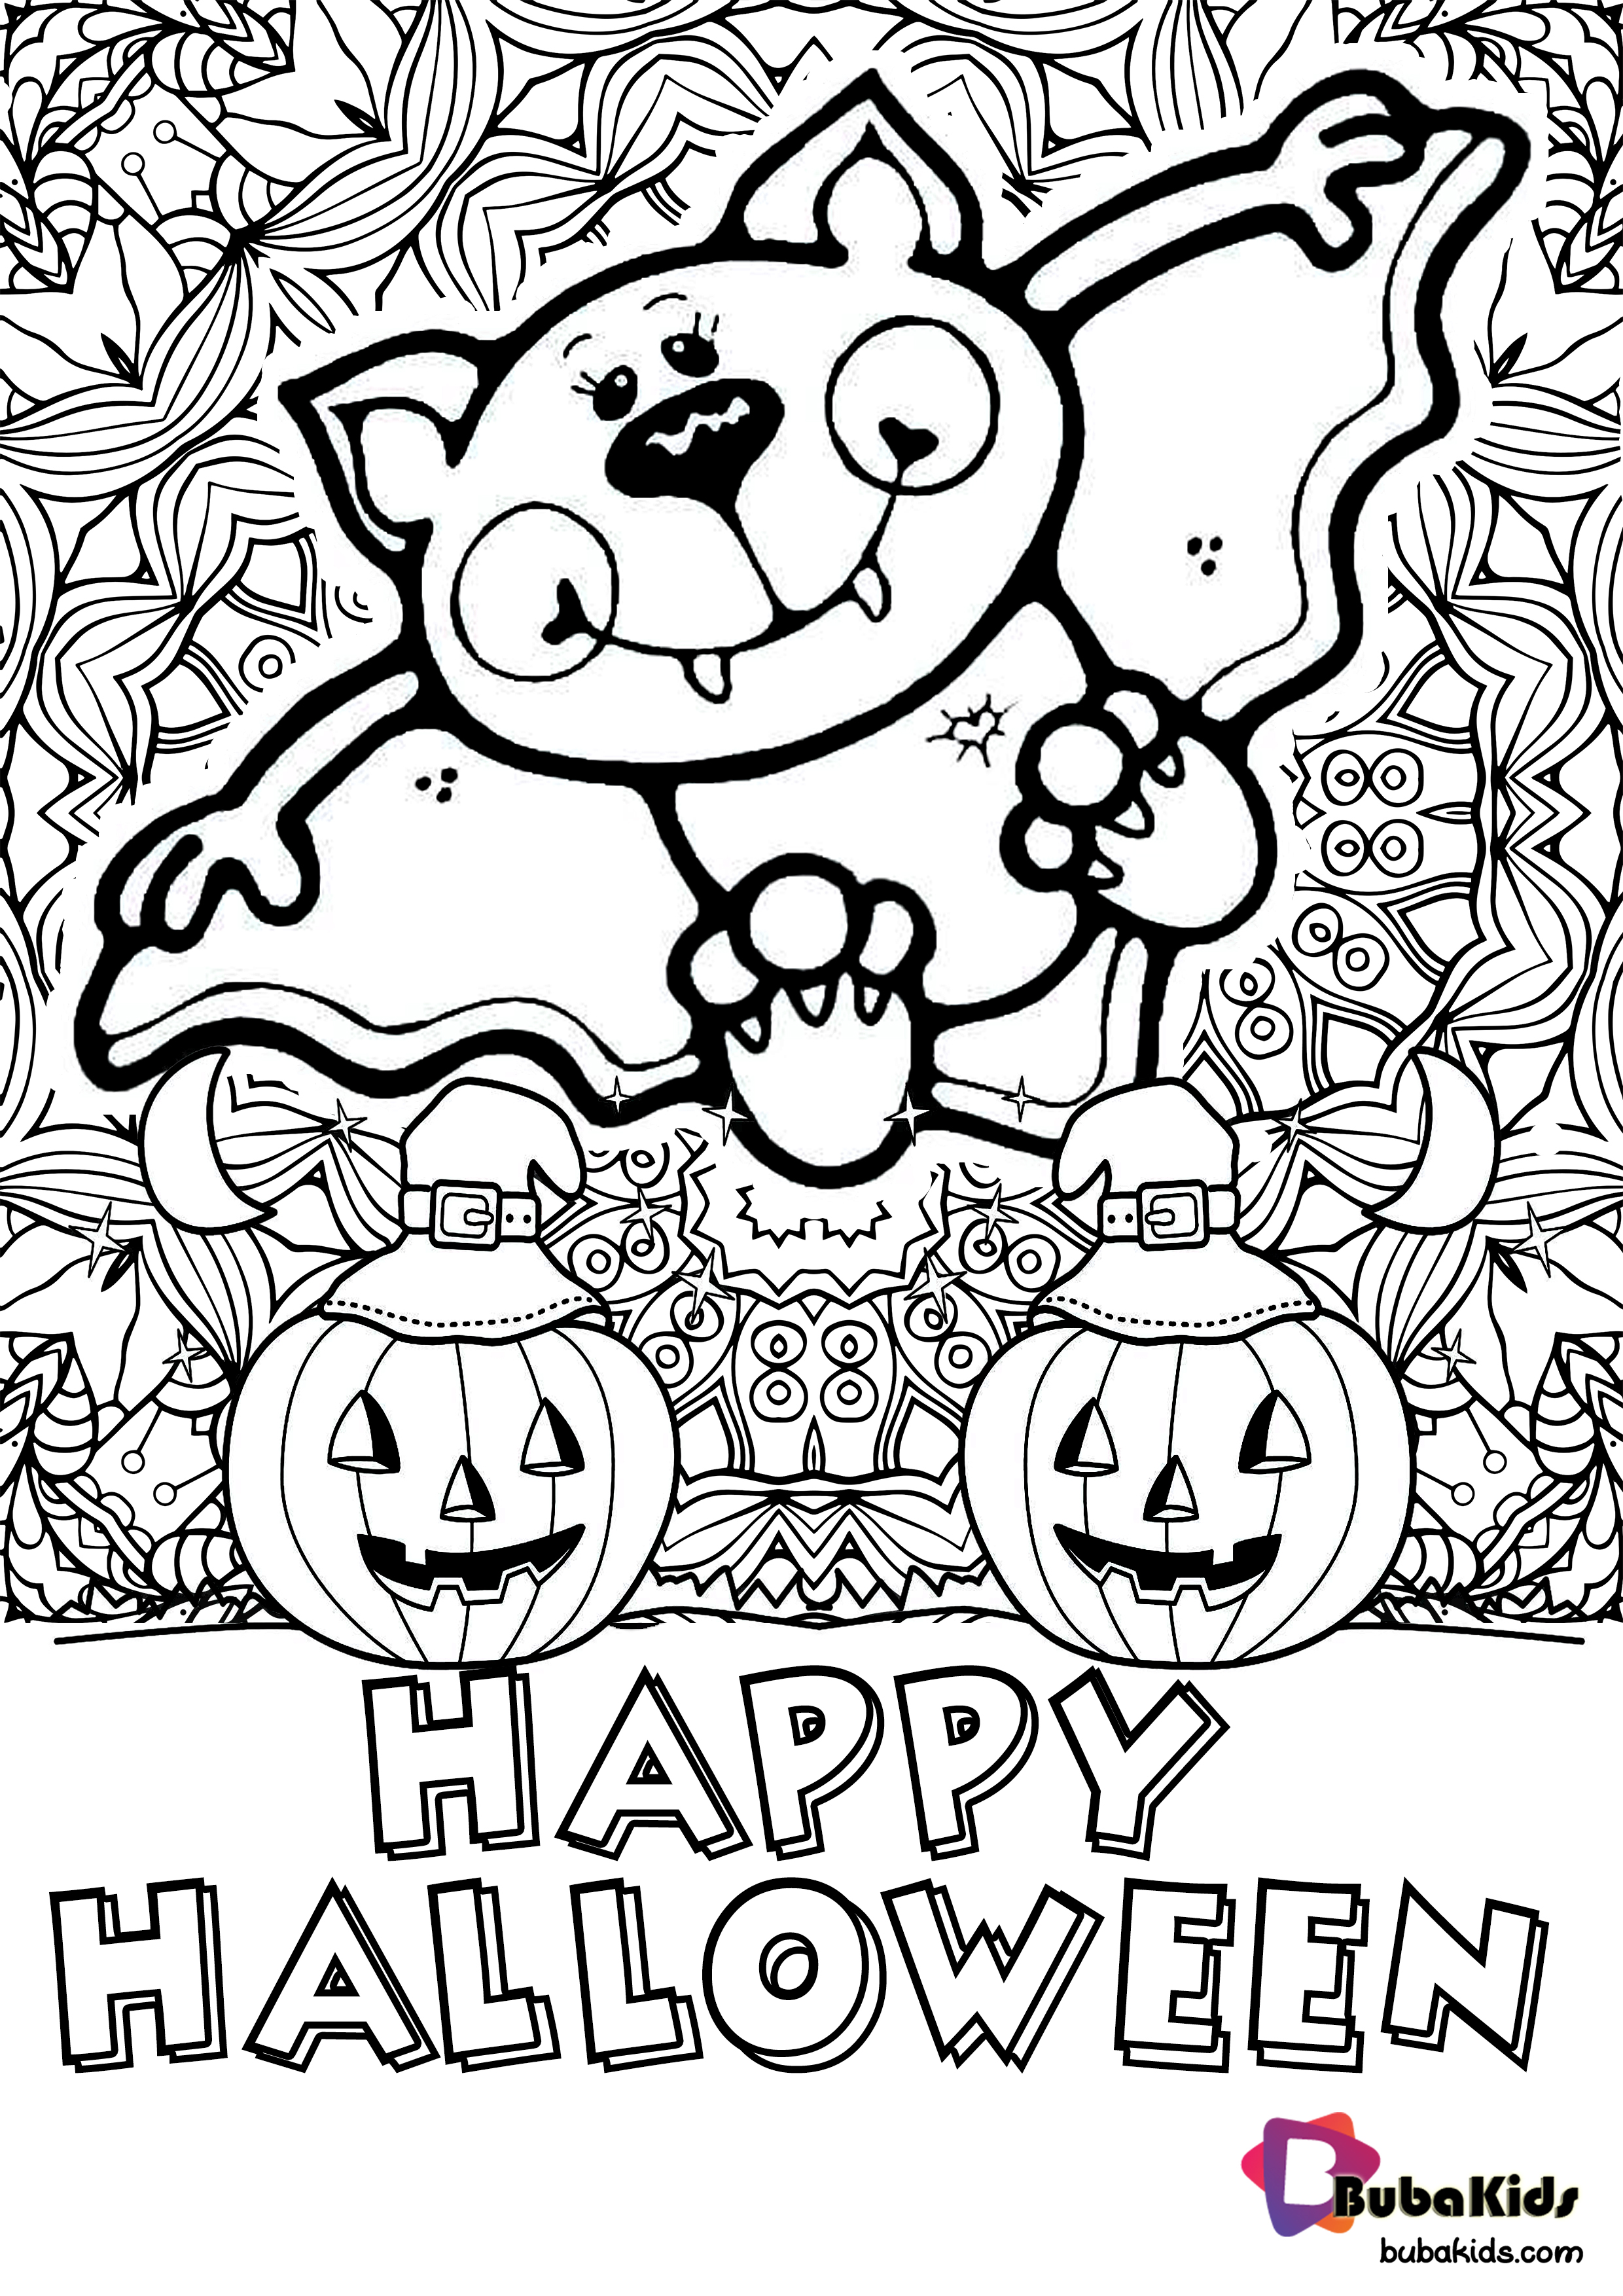 Happy Halloween Coloring Page Wallpaper